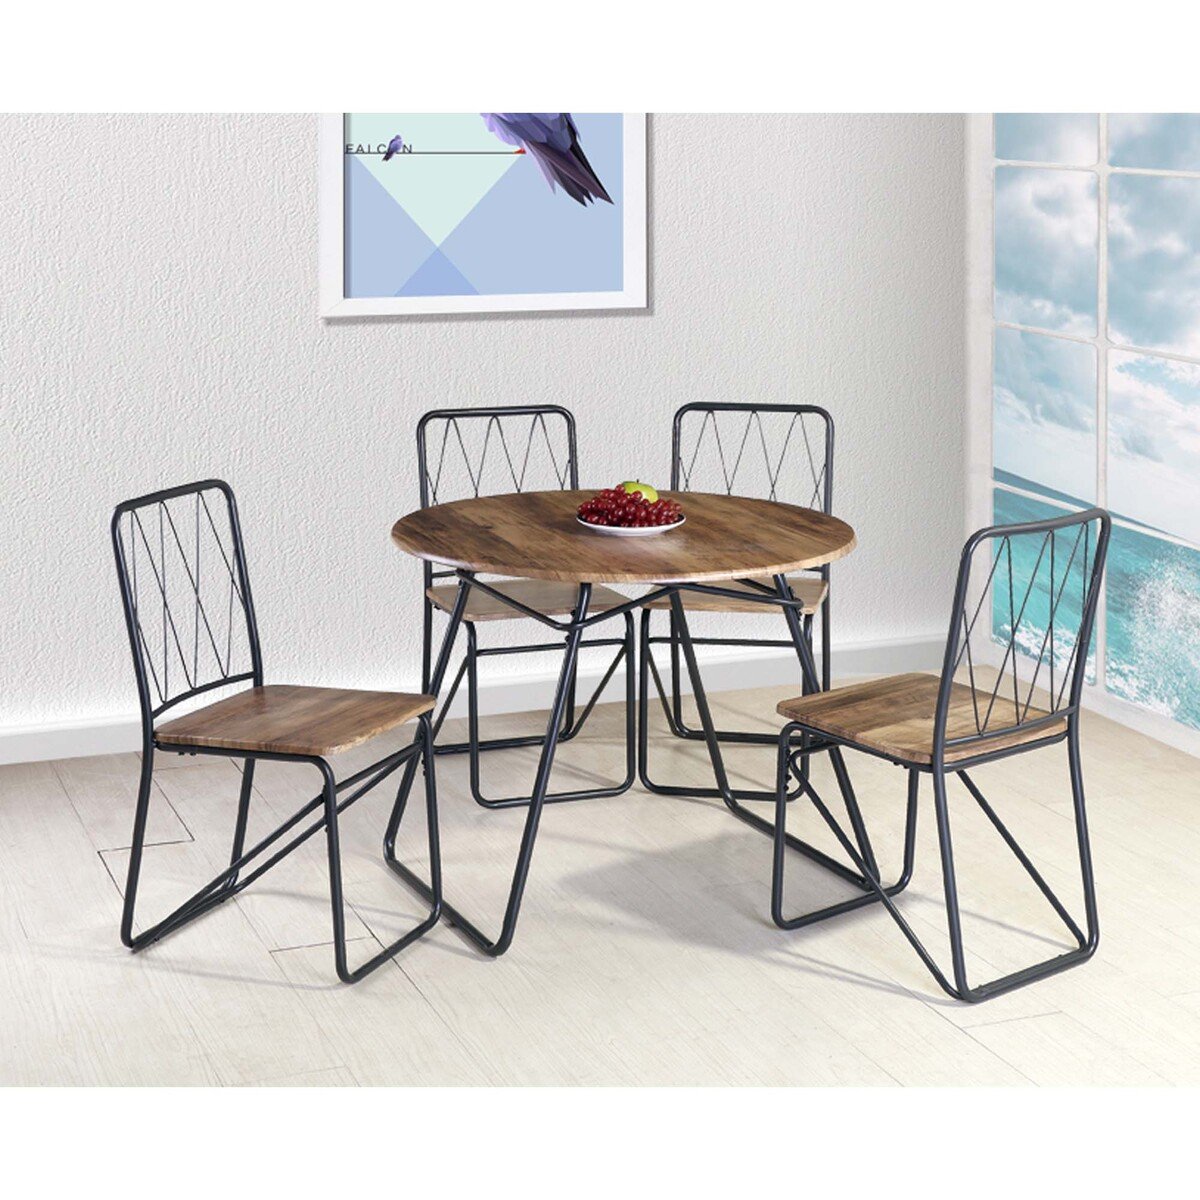 Maple Leaf Home Round Table + 4 Chair Wood LY-NO-834